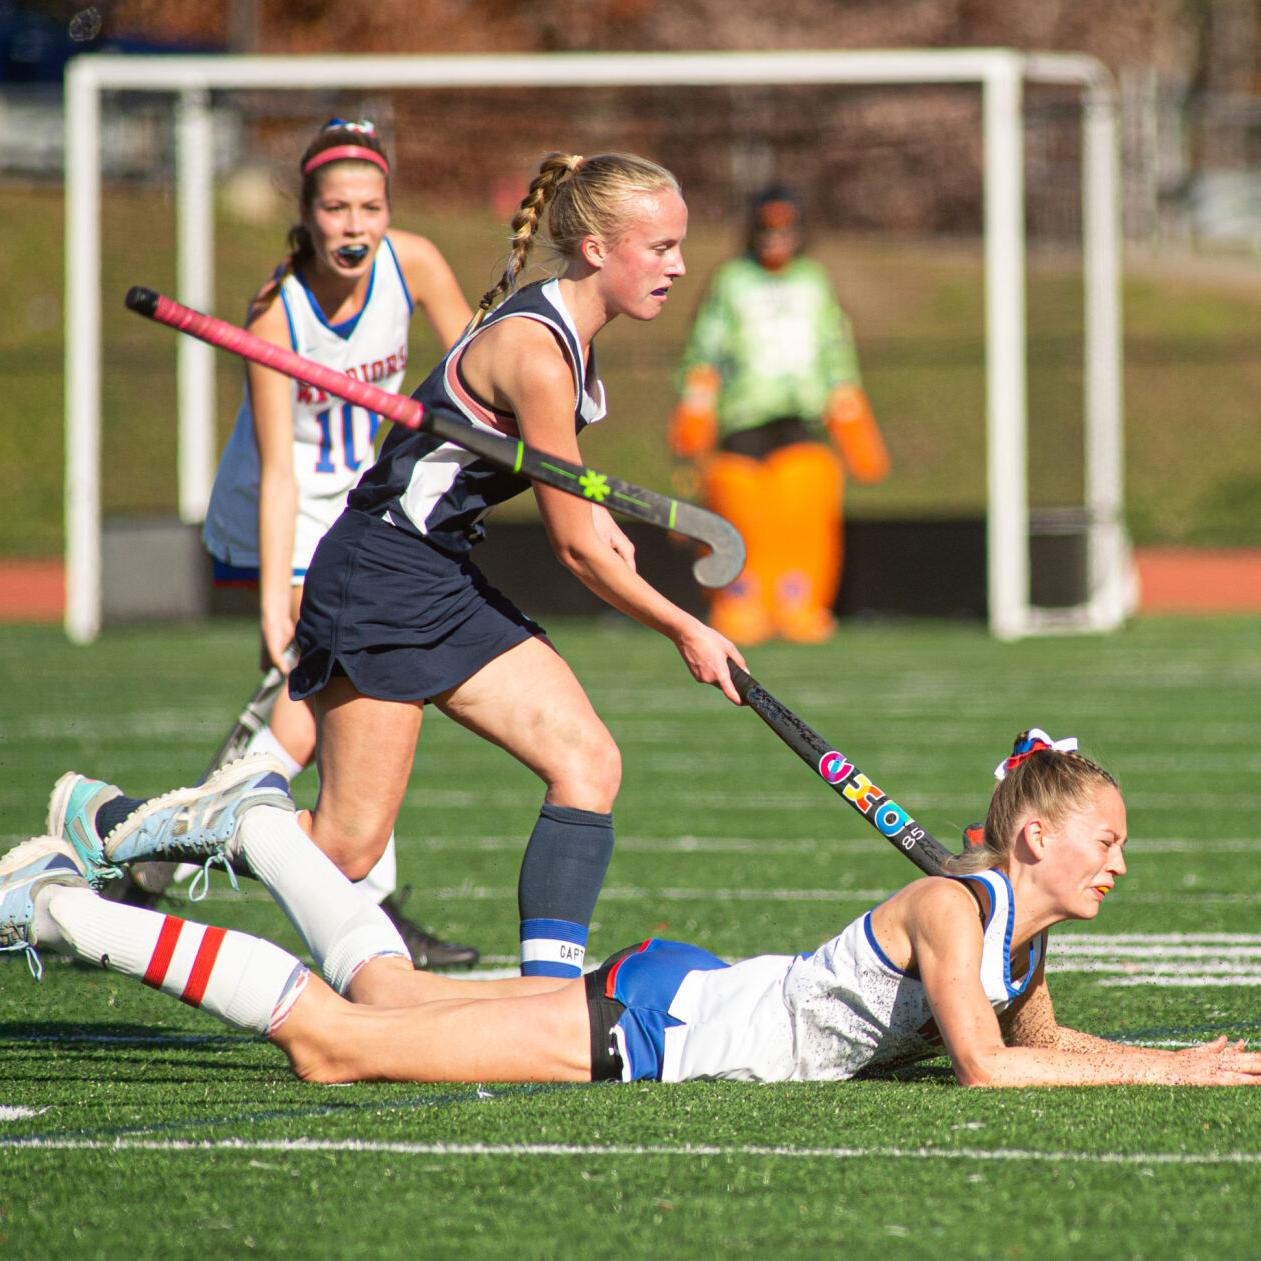 Eastlake girls field hockey team claims undefeated league championship